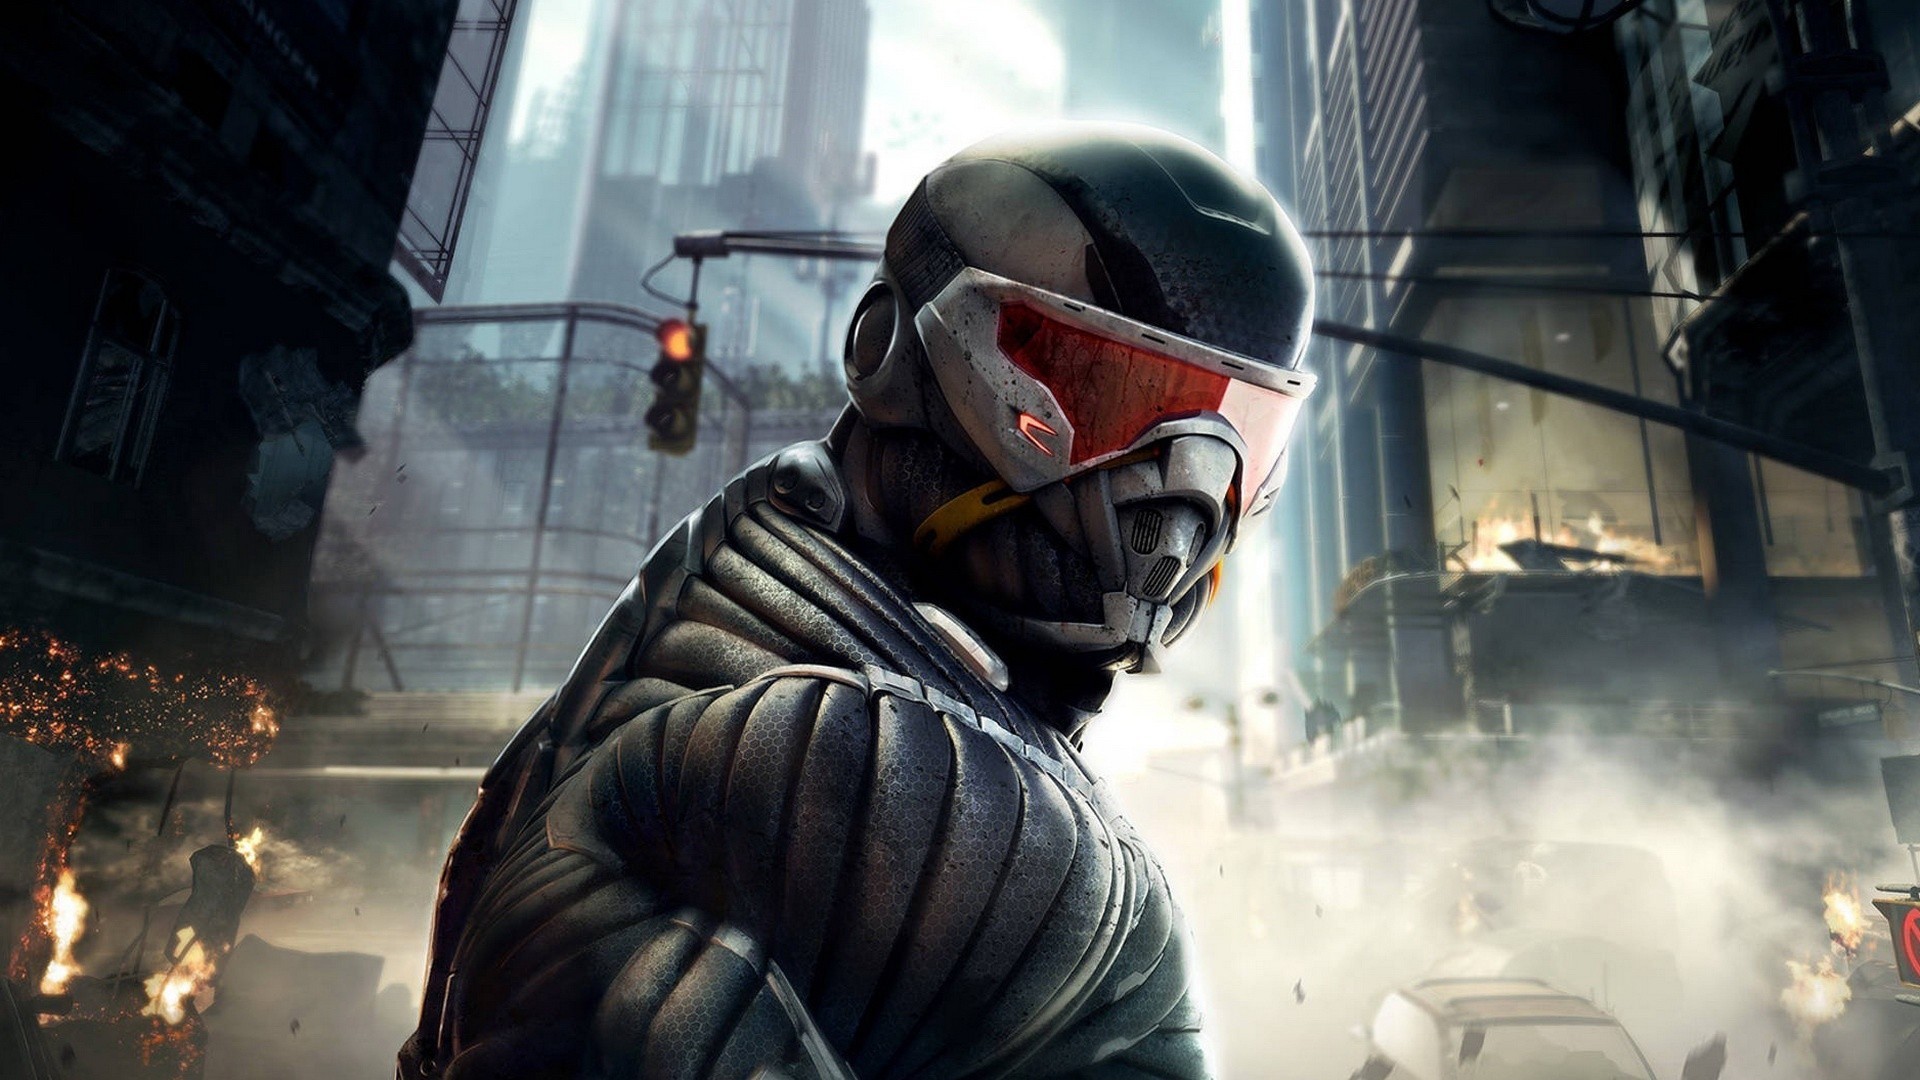 Wallpapers video games soldier Crysis on the desktop